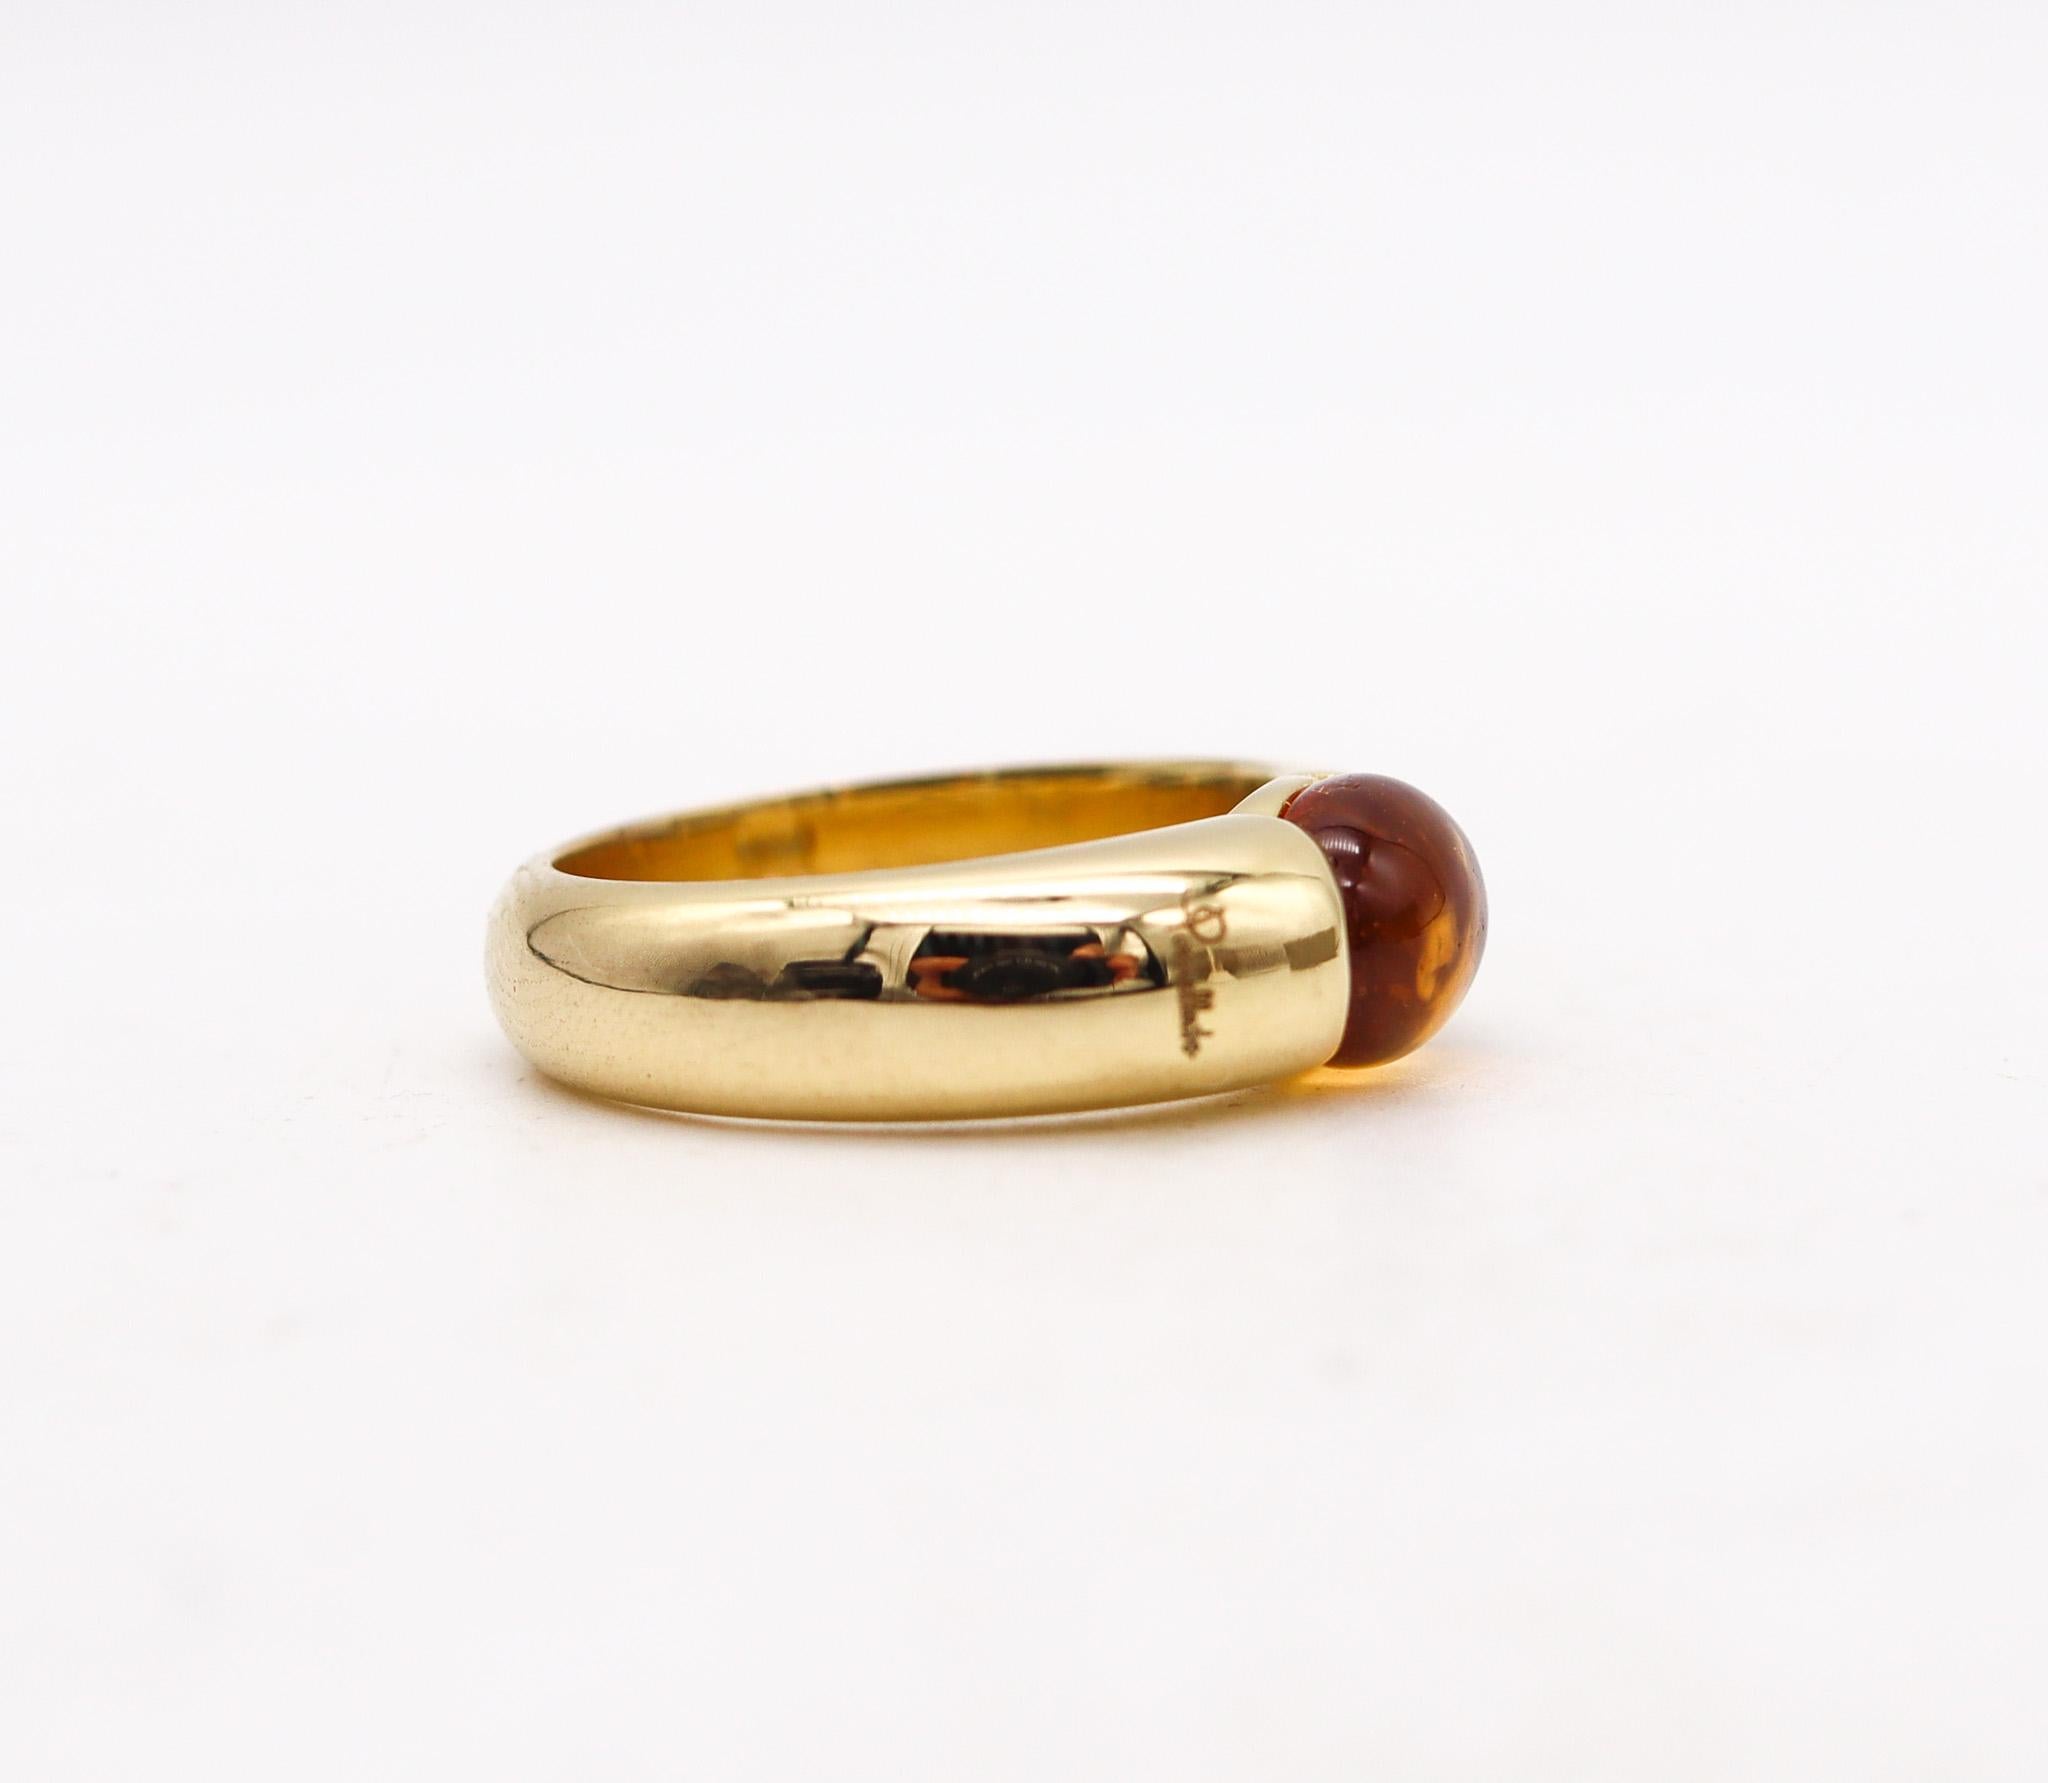 Modernist Pomellato Milan Candy Ring In 18Kt Yellow Gold With 4.75 Cts Orange Citrine For Sale